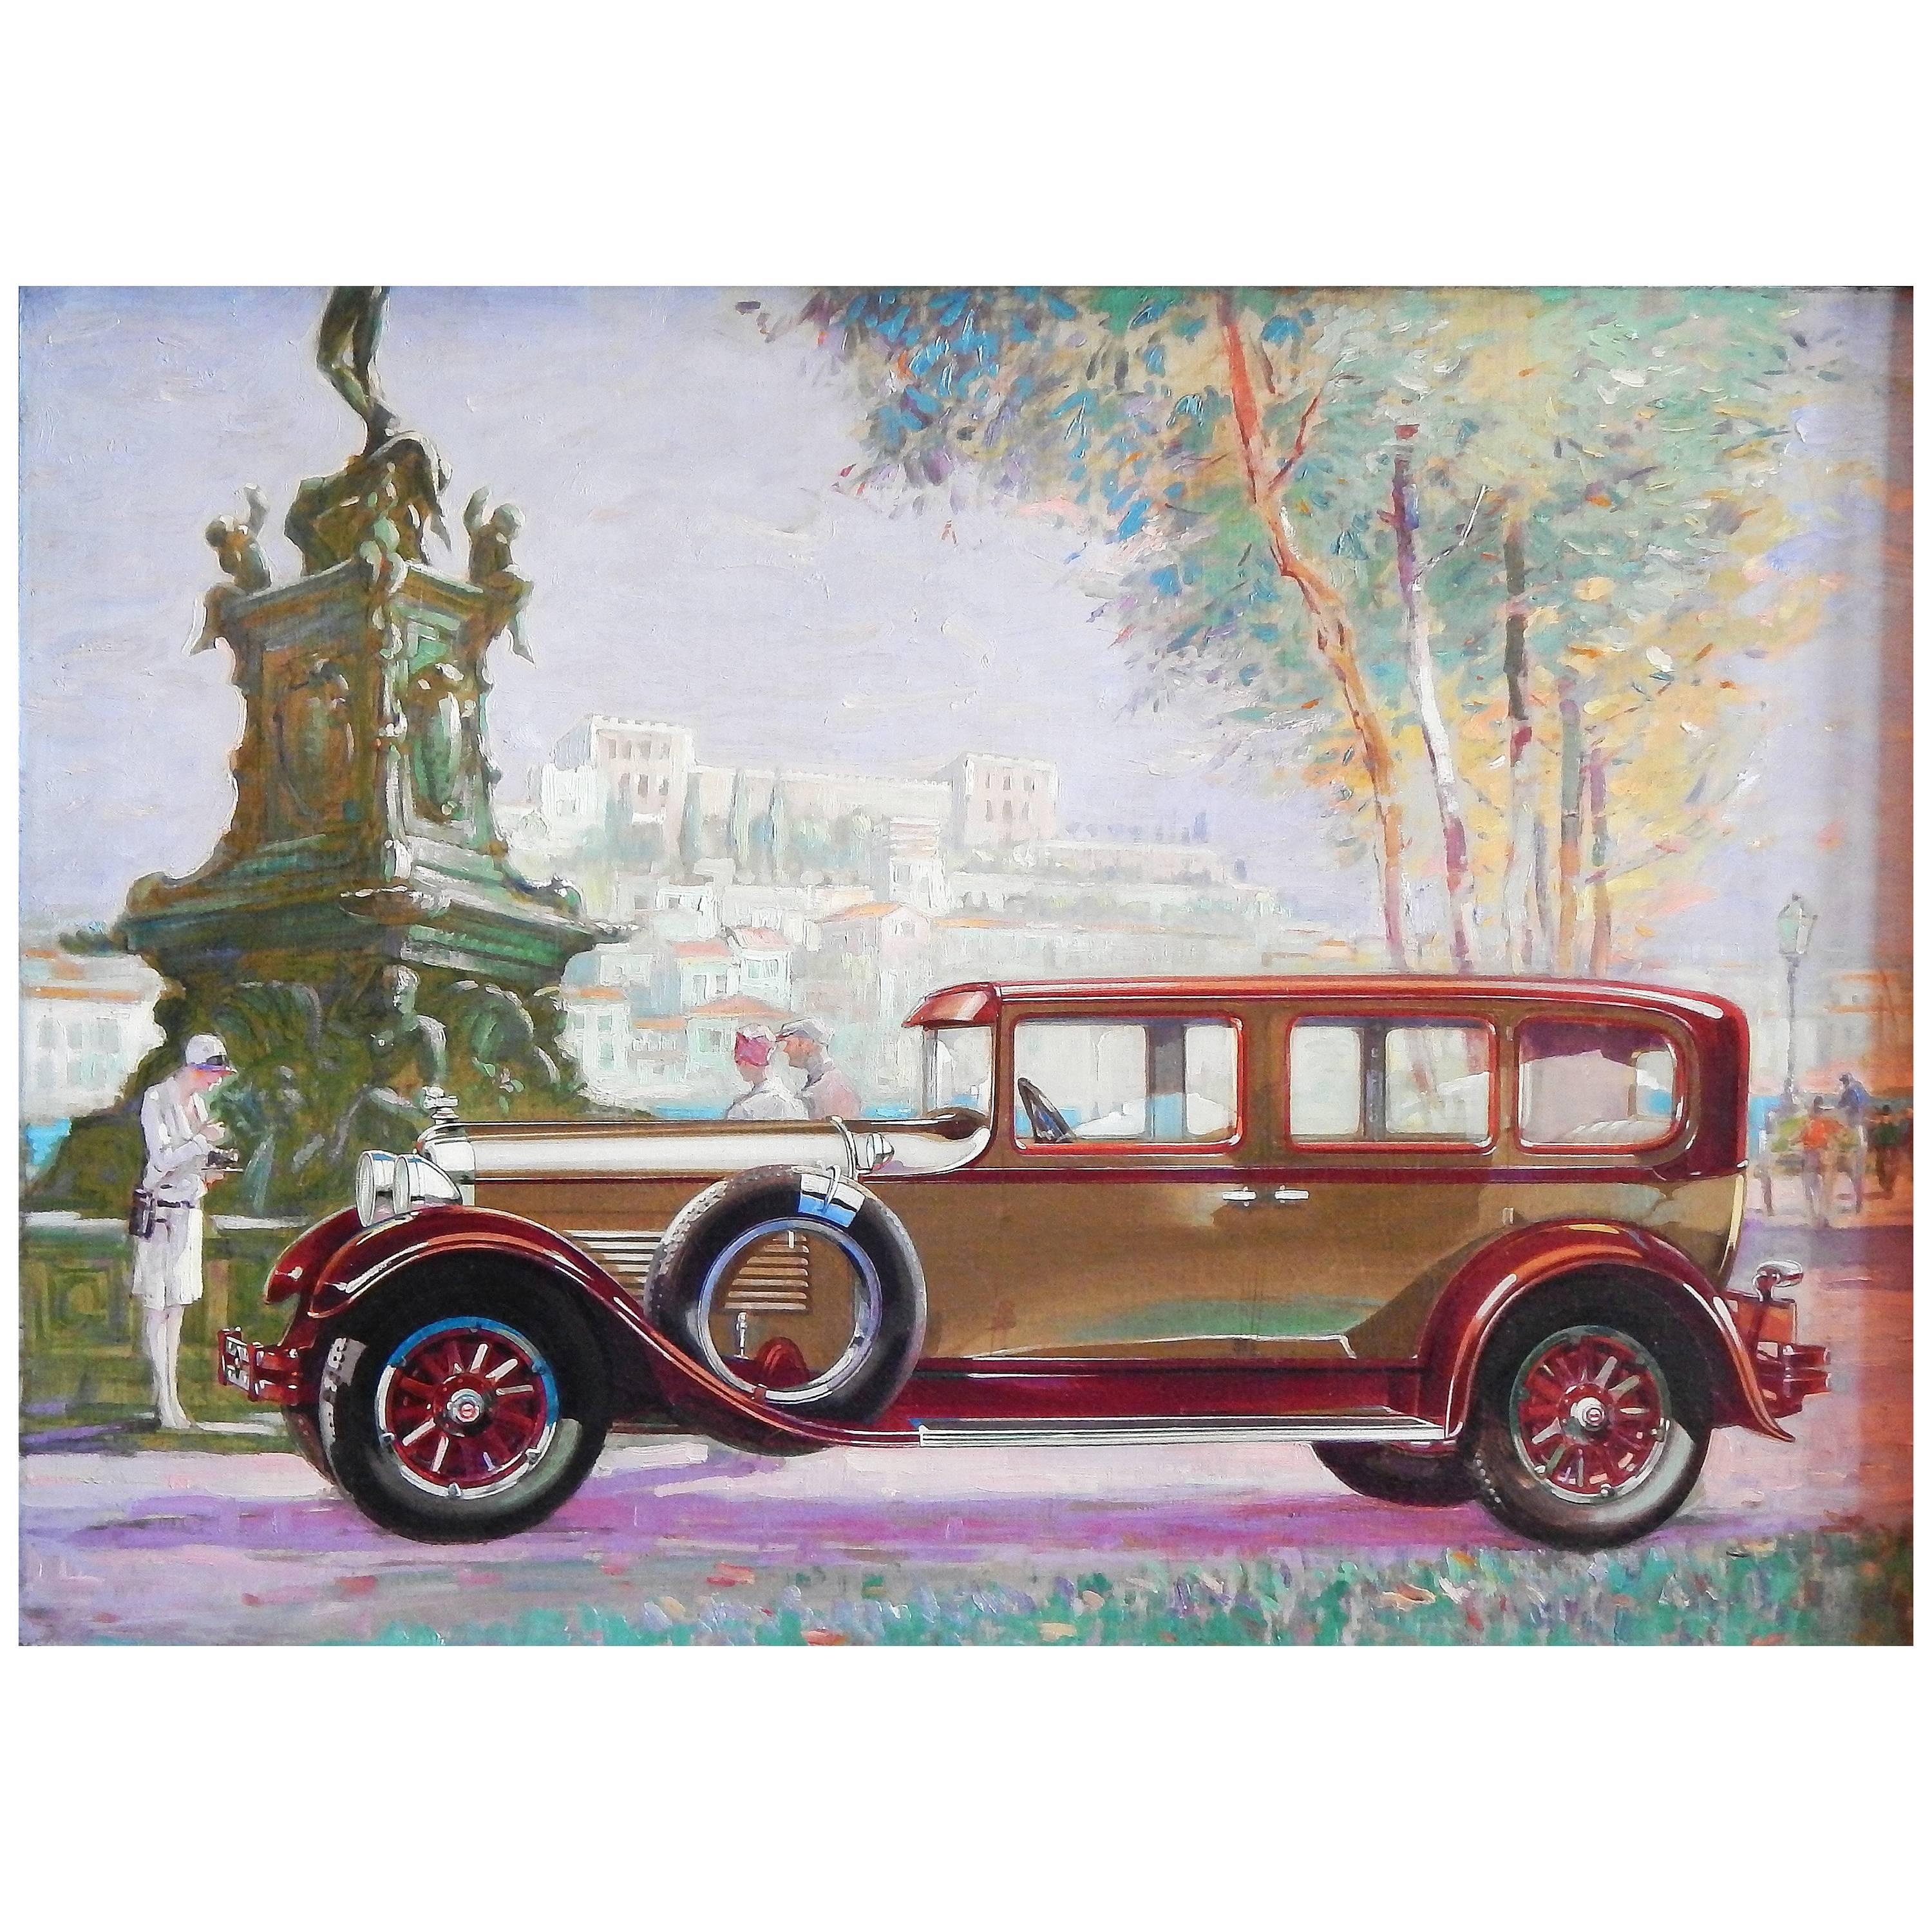 Original Painting for 1928 Packard Advertisement, Stunning Oil on Canvas